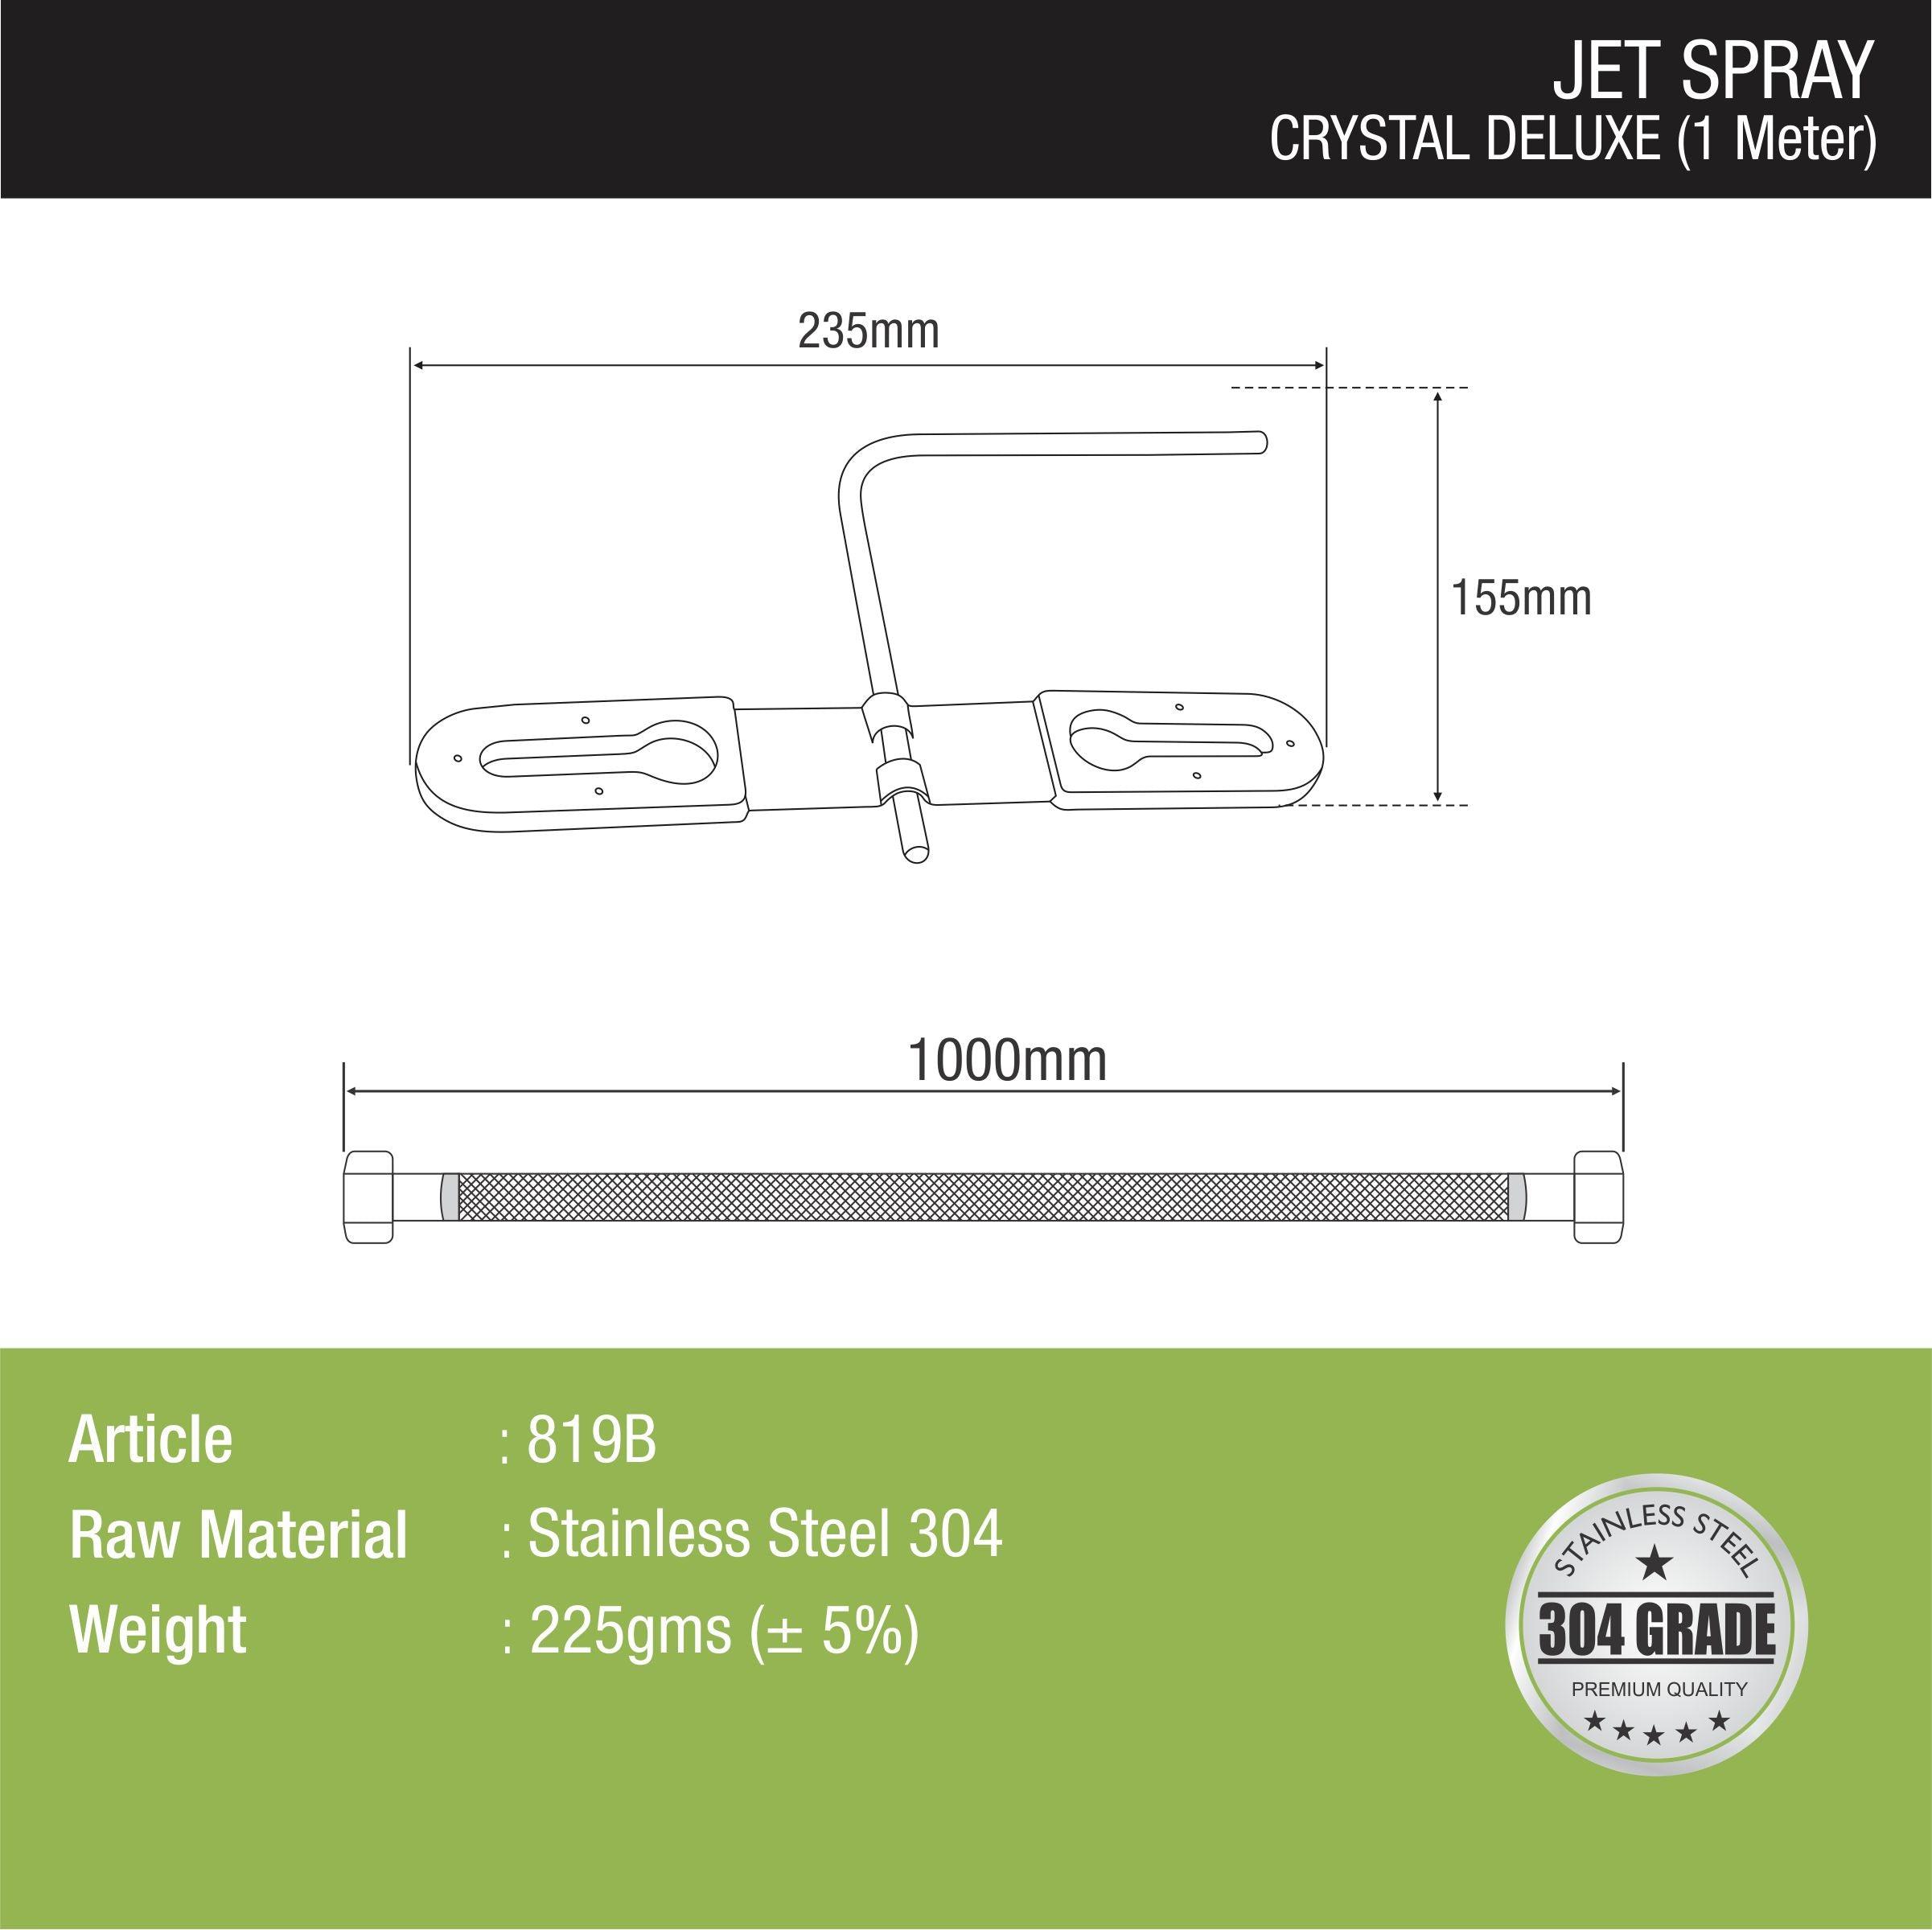 Crystal Deluxe Jet Spray with 304SS Holder & 1 Meter Hose dimensions and sizes